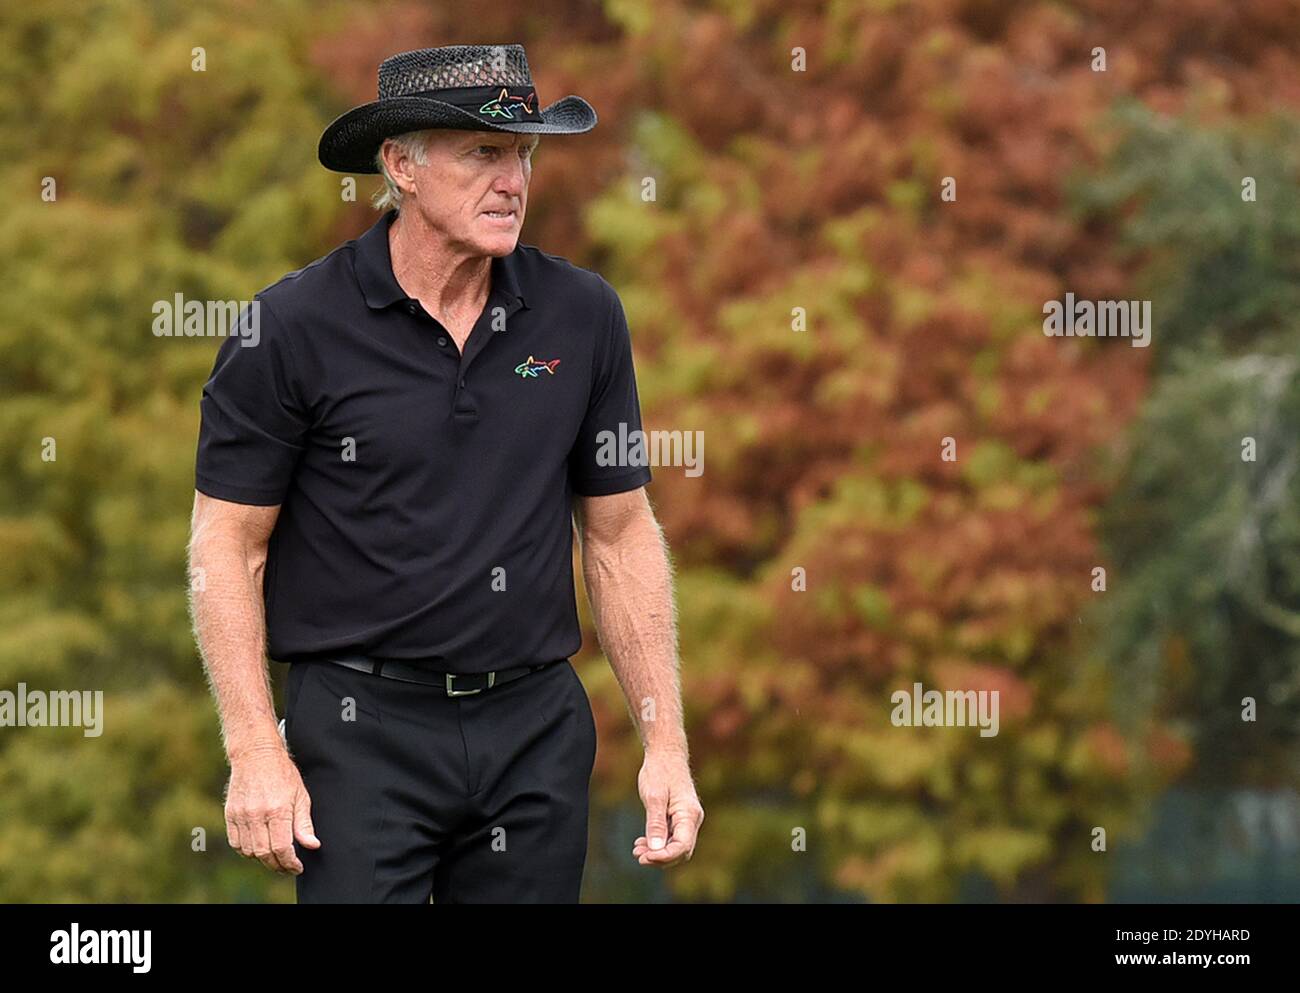 December 20, 2020 - Orlando, Florida, United States - Australian Greg Norman walks the 18th green during the final round at the PNC Championship golf tournament at the Ritz-Carlton Golf Club on December 20, 2020 in Orlando, Florida. On Christmas Day, Norman posted a photo to Instagram from a hospital bed where he was being treated for COVID-19 symptoms. NormanÕs son, Greg Norman Jr., who played with his father at the tournament, also posted a photo to Instagram, stating that he and his fiancee have tested positive for the COVID-19 virus. (Paul Hennessy/Alamy) Stock Photo